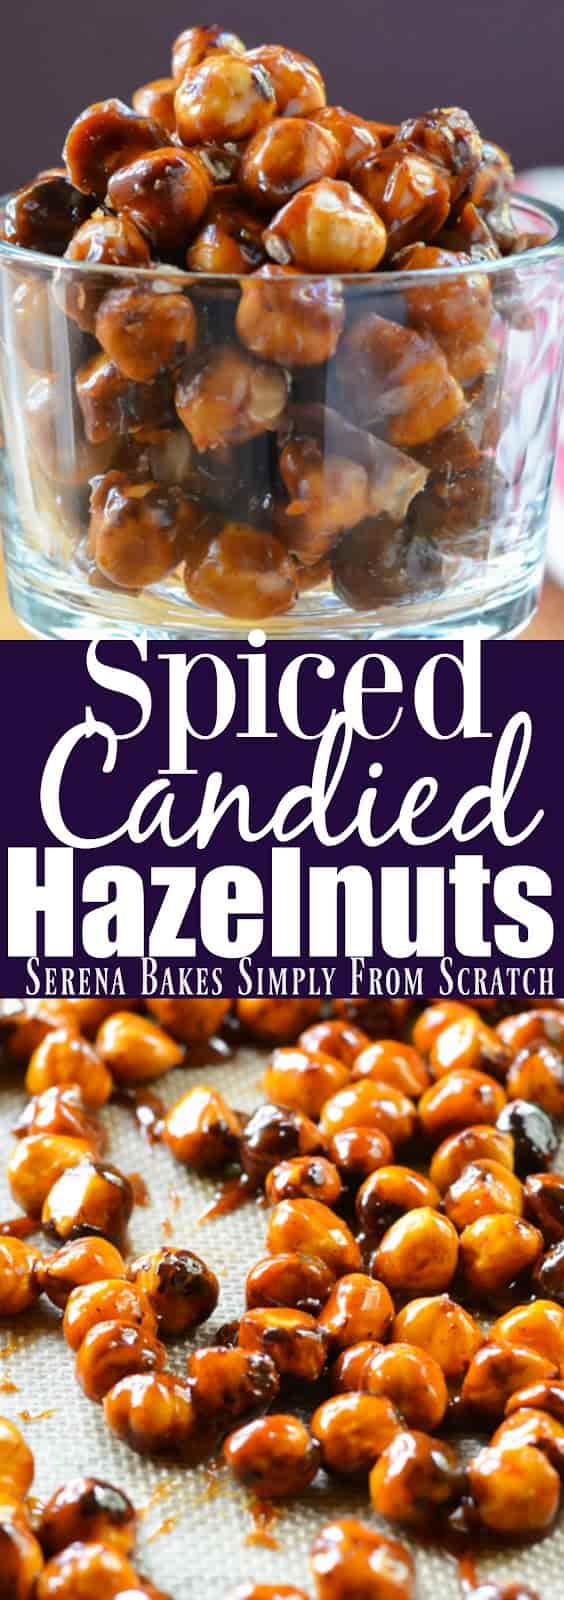 Easy to make Spiced Candied Hazelnuts recipe from Serena Bakes Simply From Scratch.